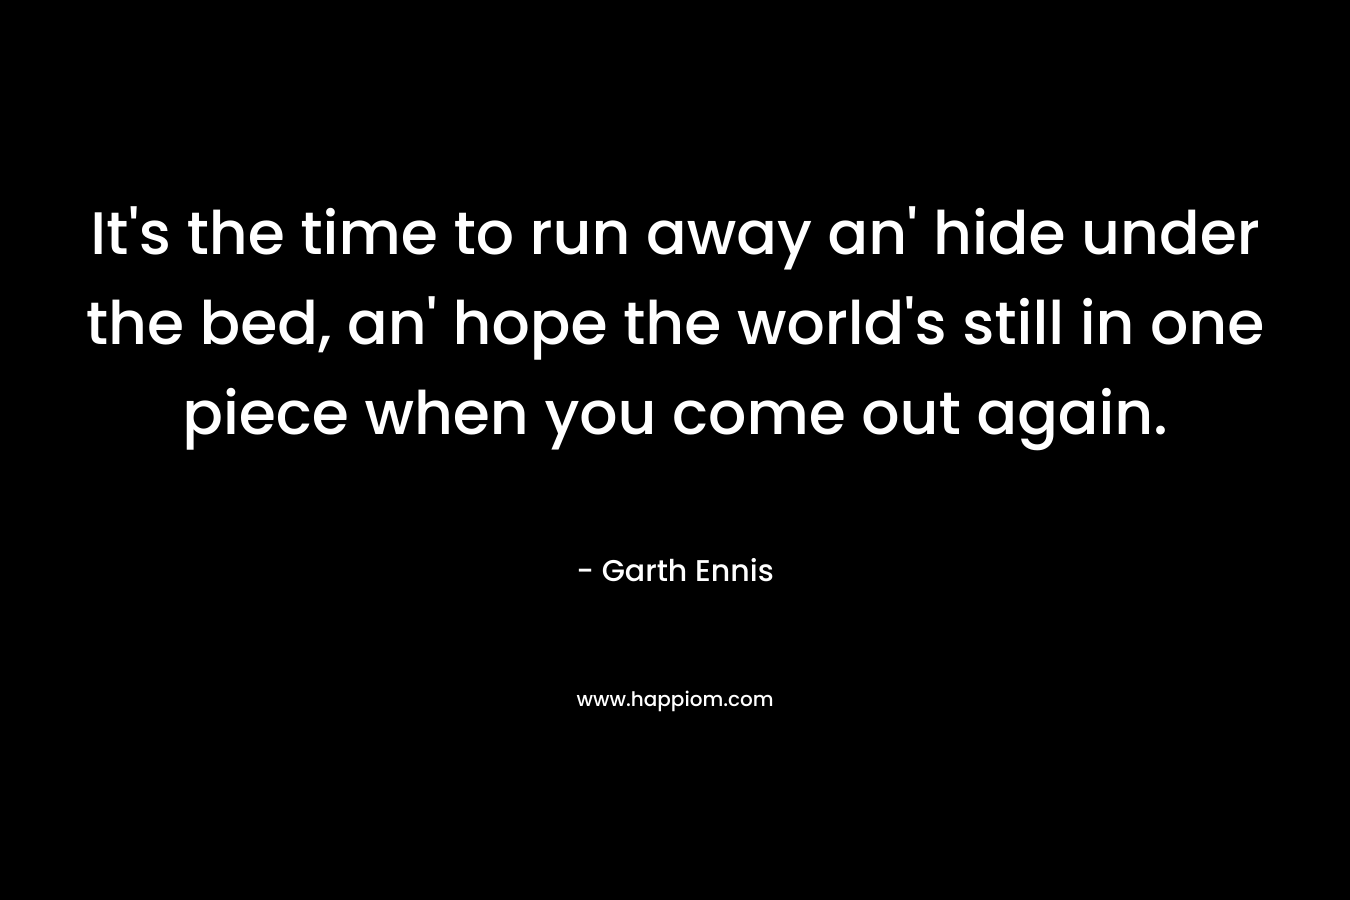 It's the time to run away an' hide under the bed, an' hope the world's still in one piece when you come out again.